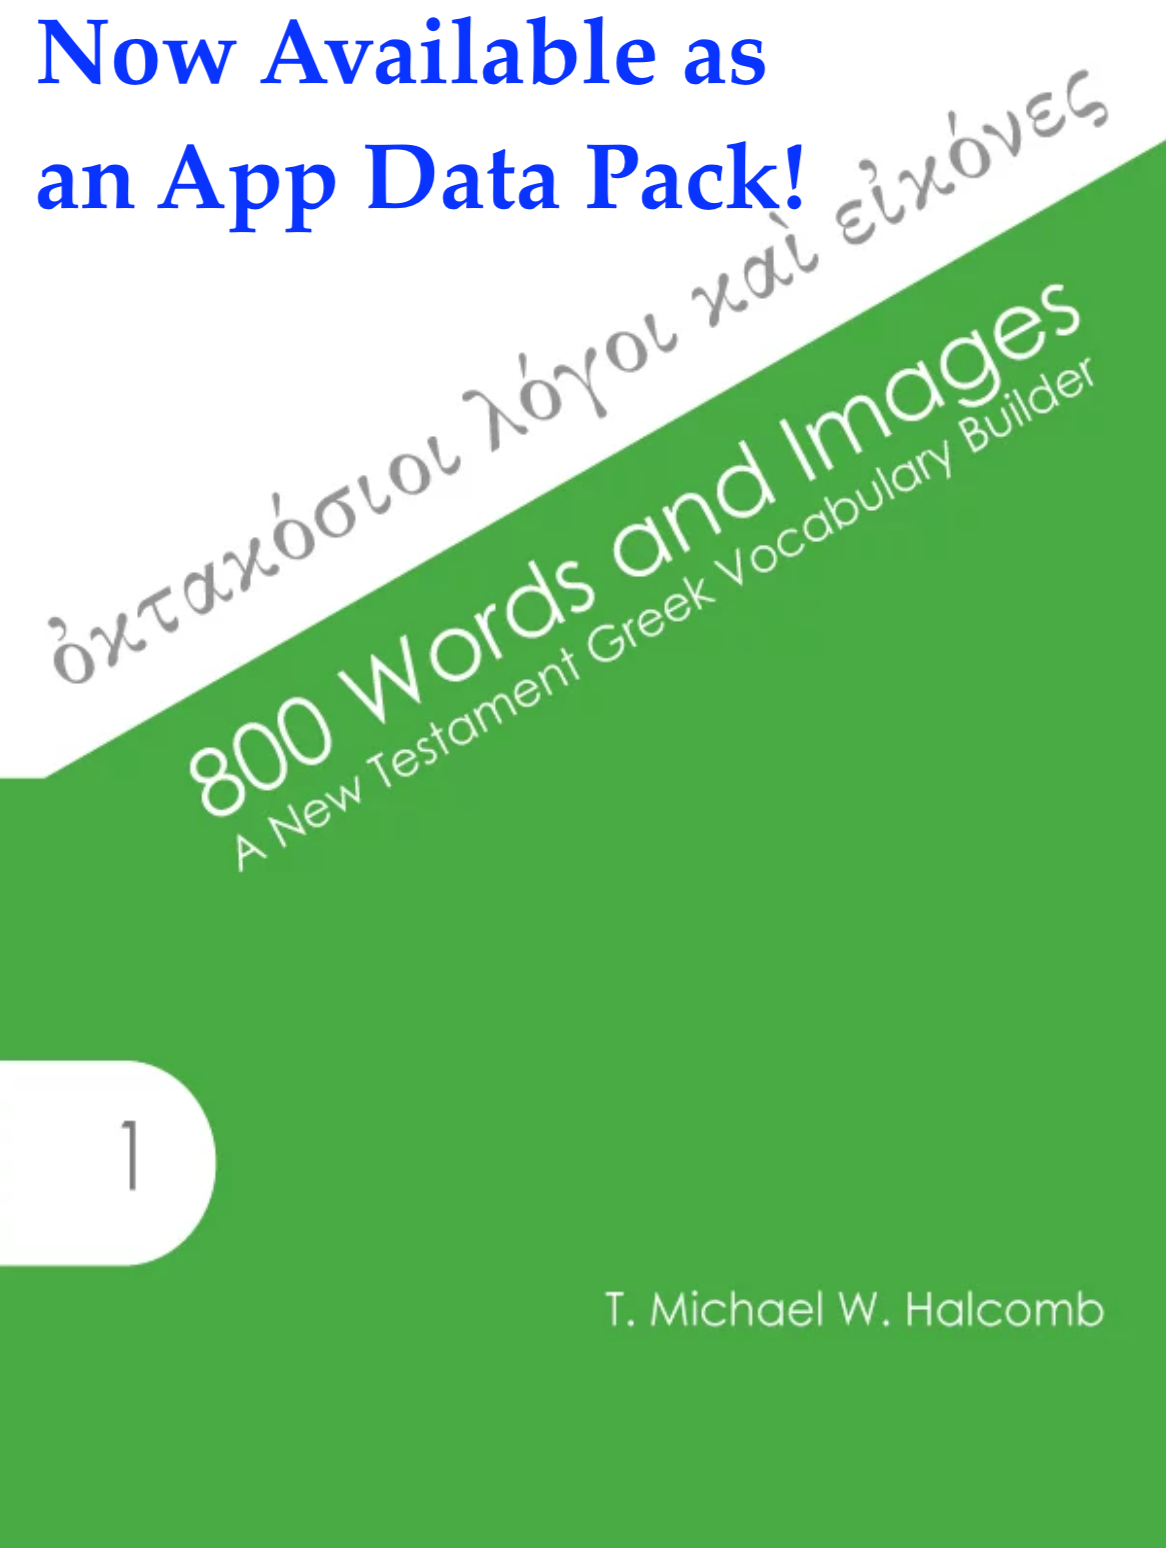 800 Words and Images Flashcard App Data Pack!